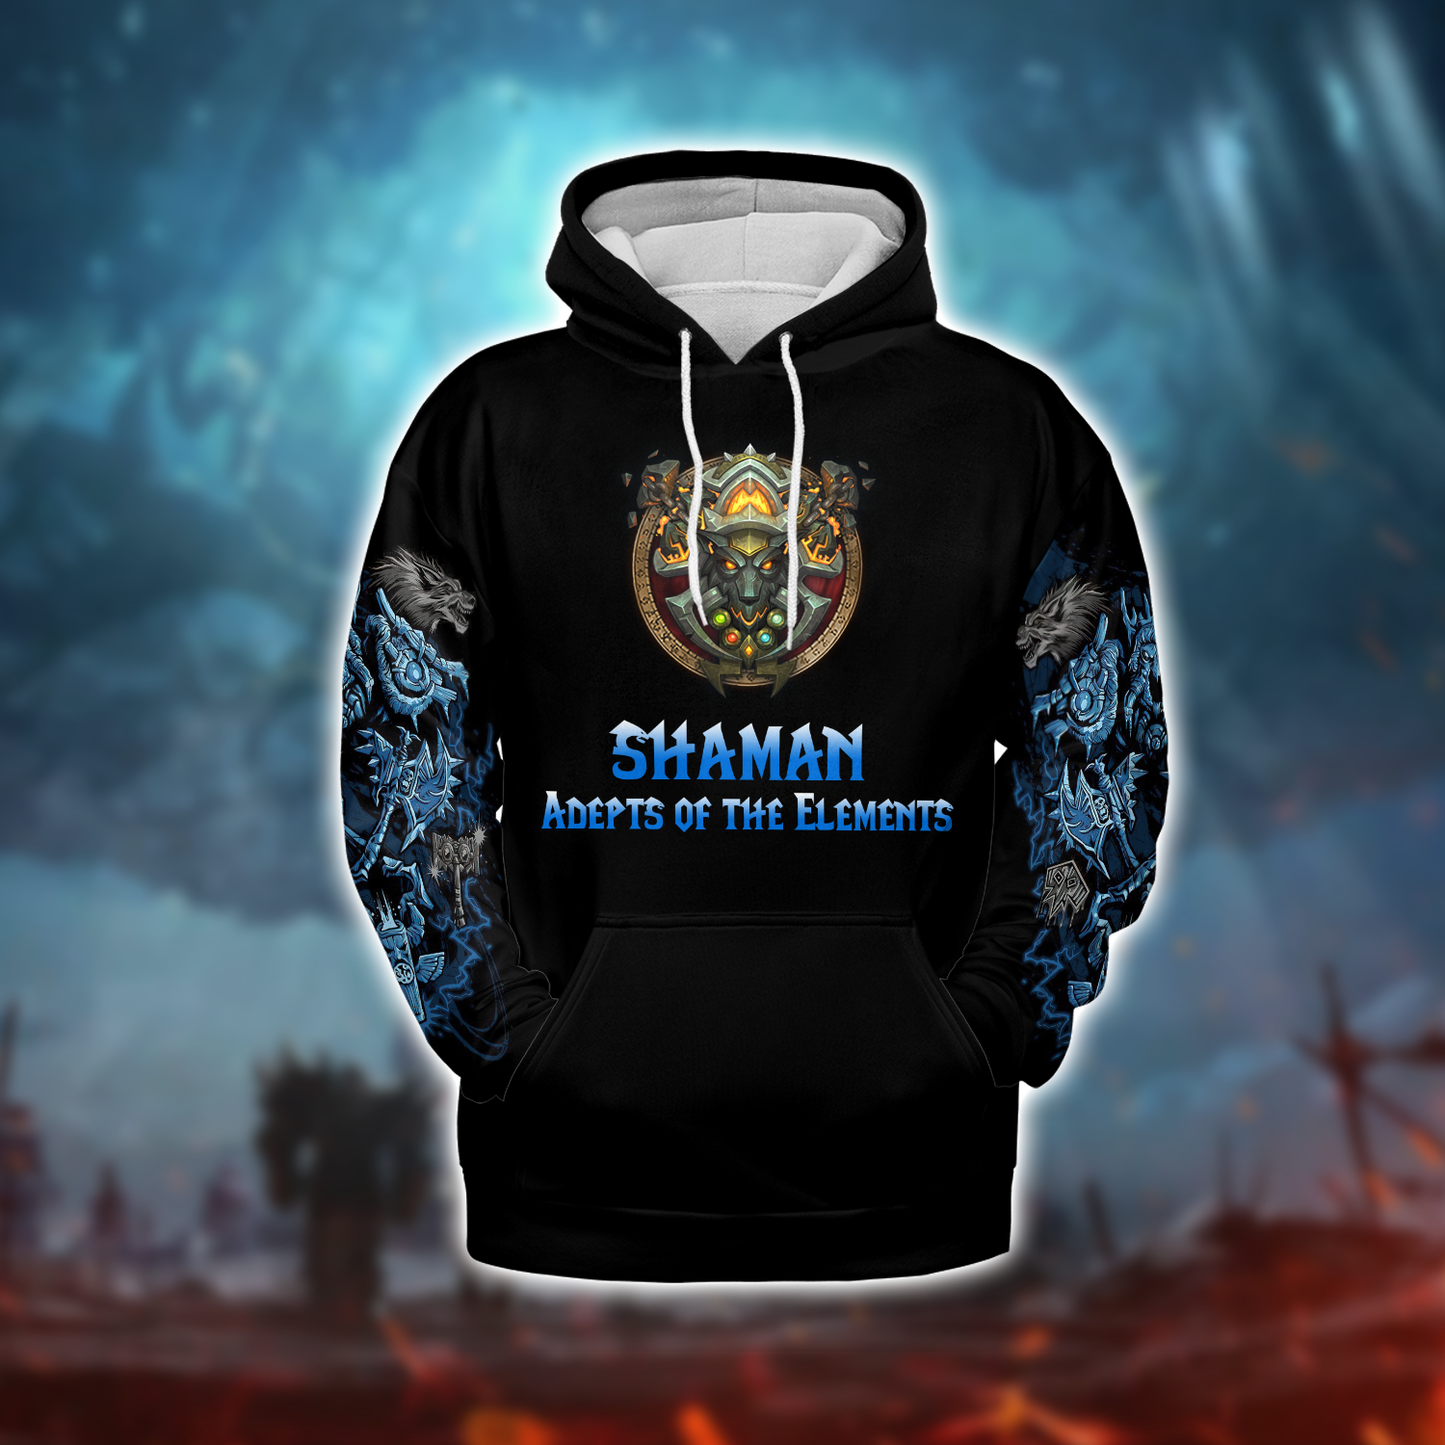 Shaman - Adepts of the Elements - WoW Class V5 AOP Hoodie